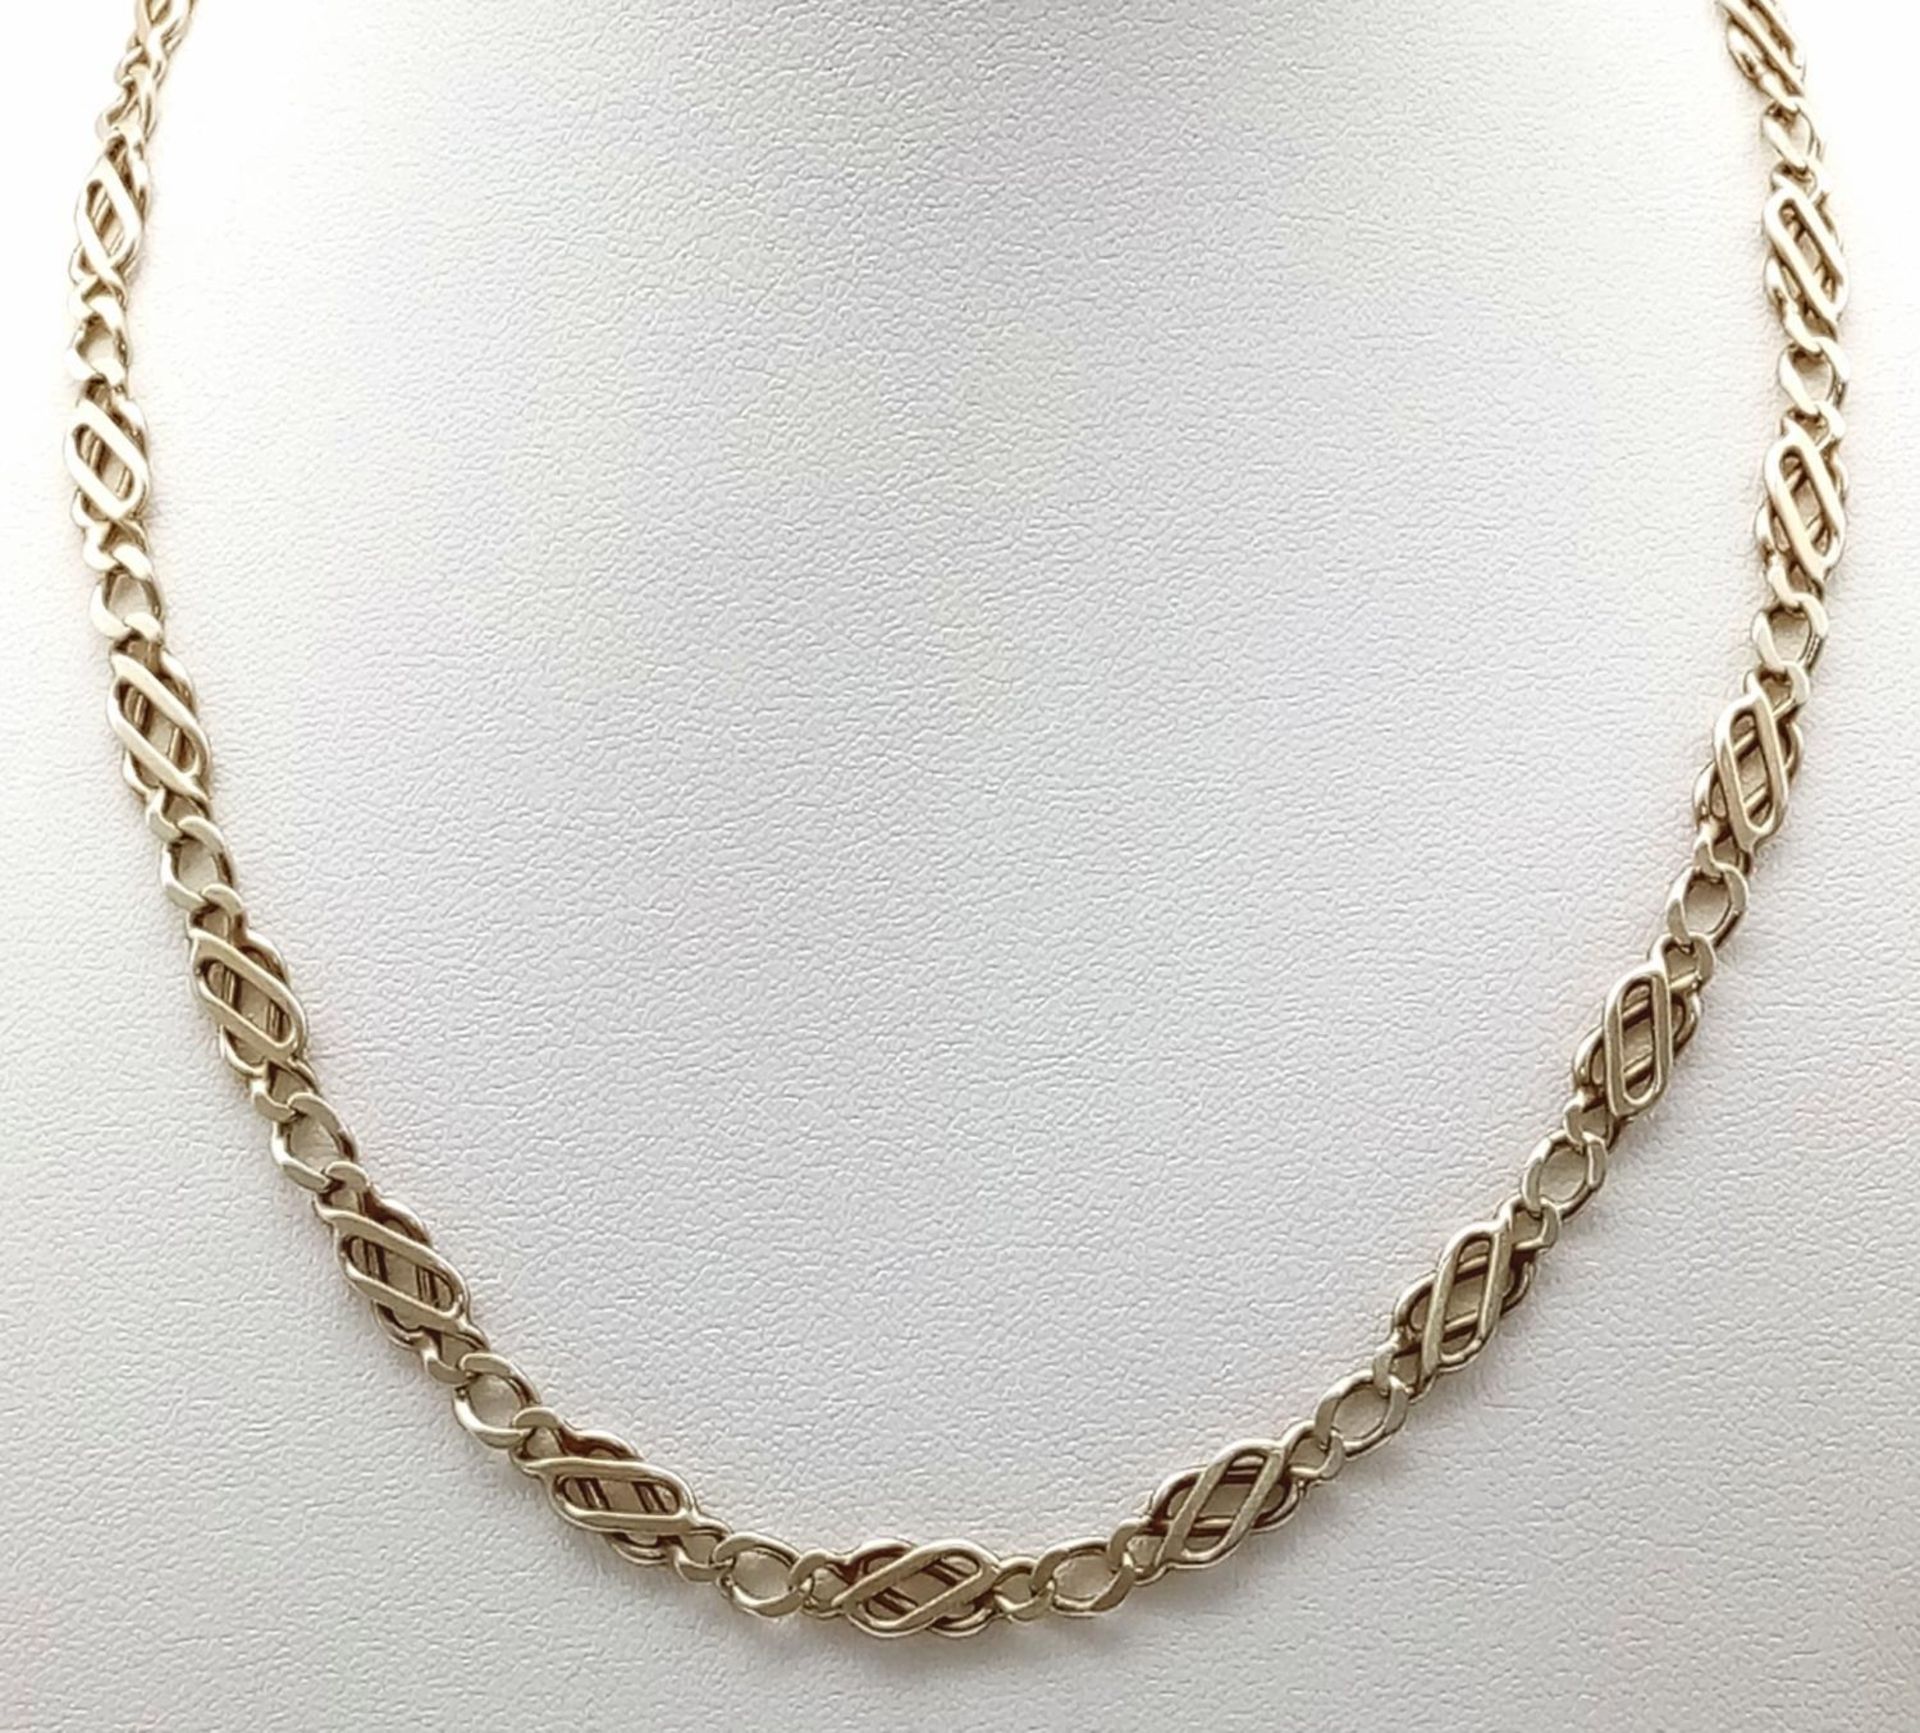 A 9k yellow gold fancy link chain. 17" length. 16.8g